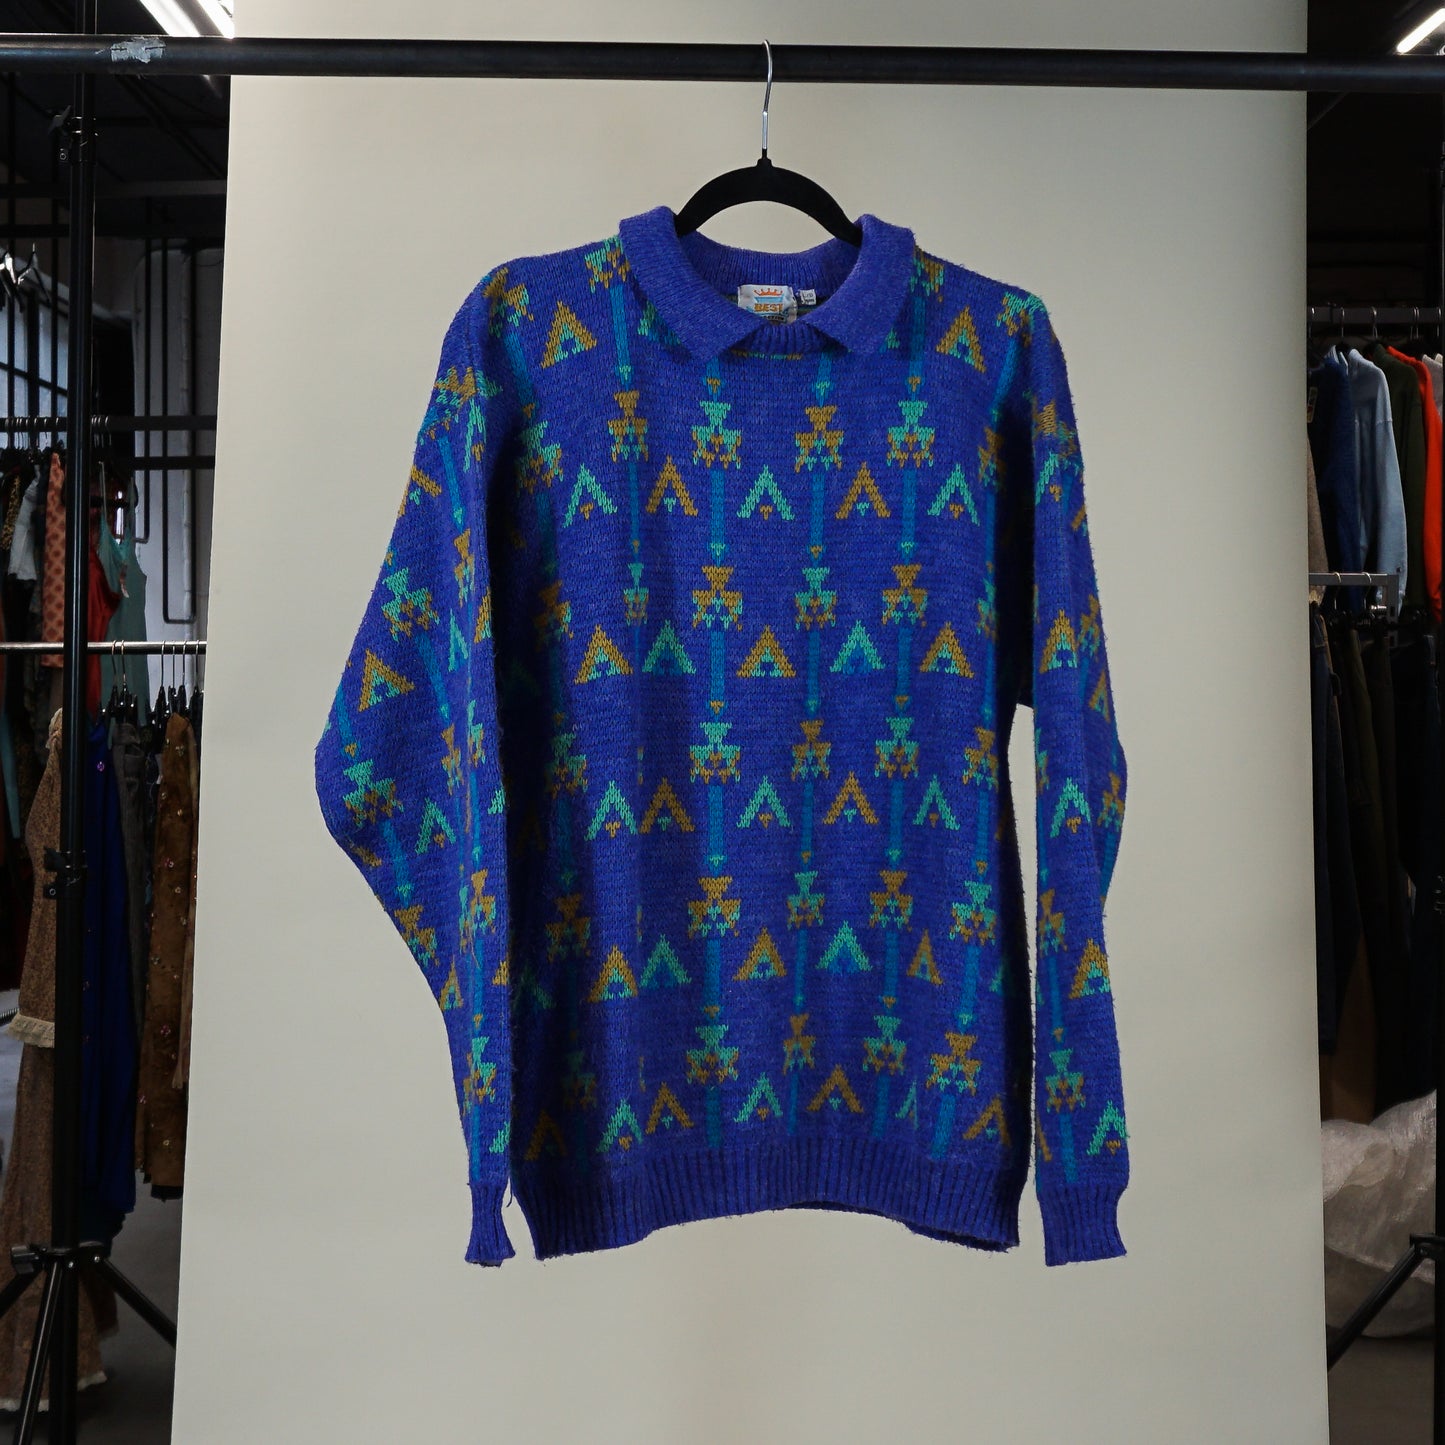 80s/90s 'Best Direction' Collared Knit Patterned Sweater (L/XL)